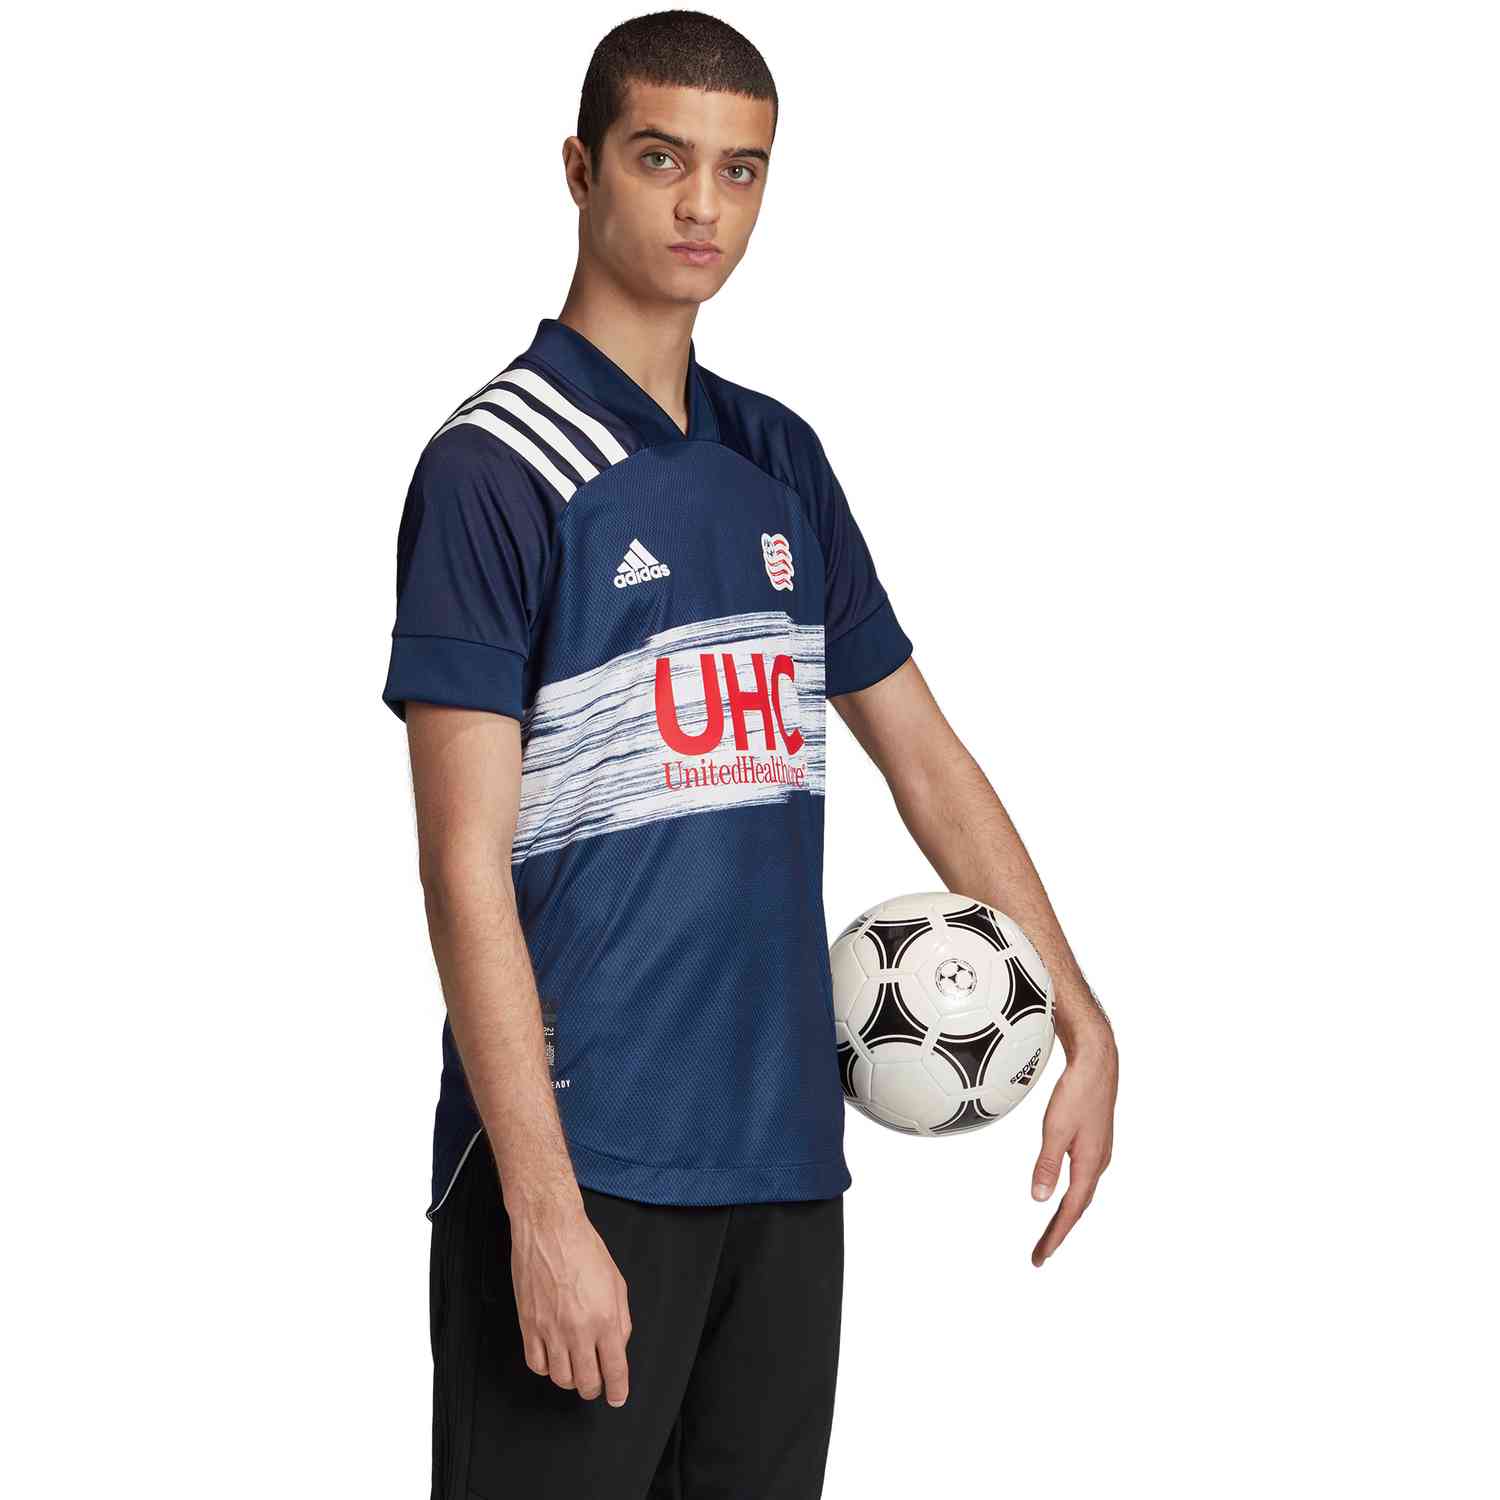 adidas, Shirts & Tops, Adidas New England Revolution Soccer Jersey Navy  Boys Girls Youth Size S 4